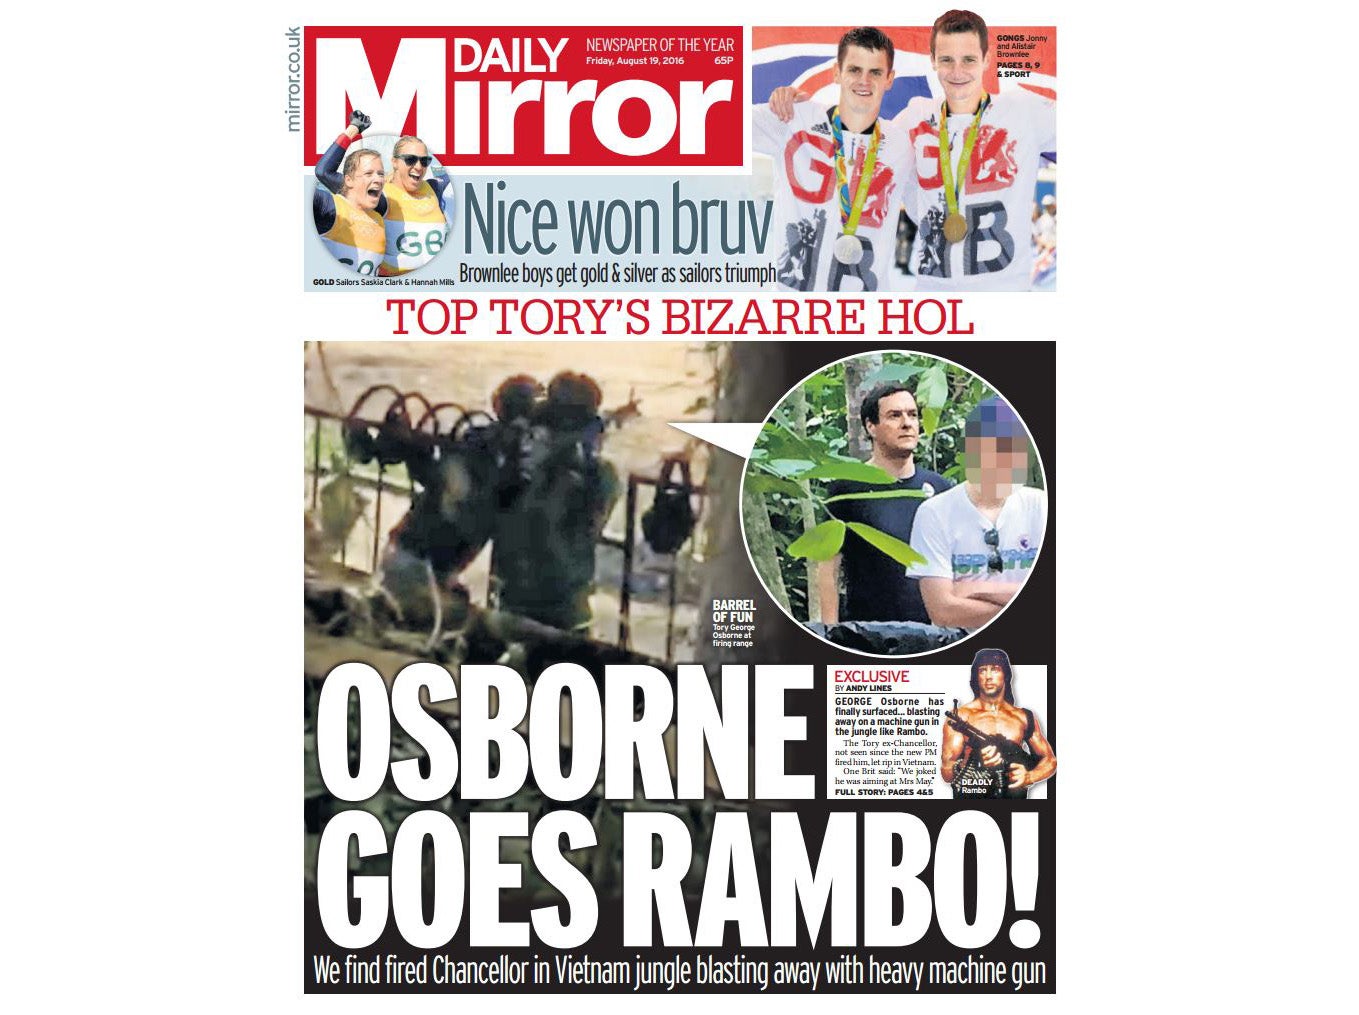 The Mirror's front cover shows the former chancellor appearing to shoot a heavy machine gun on holiday